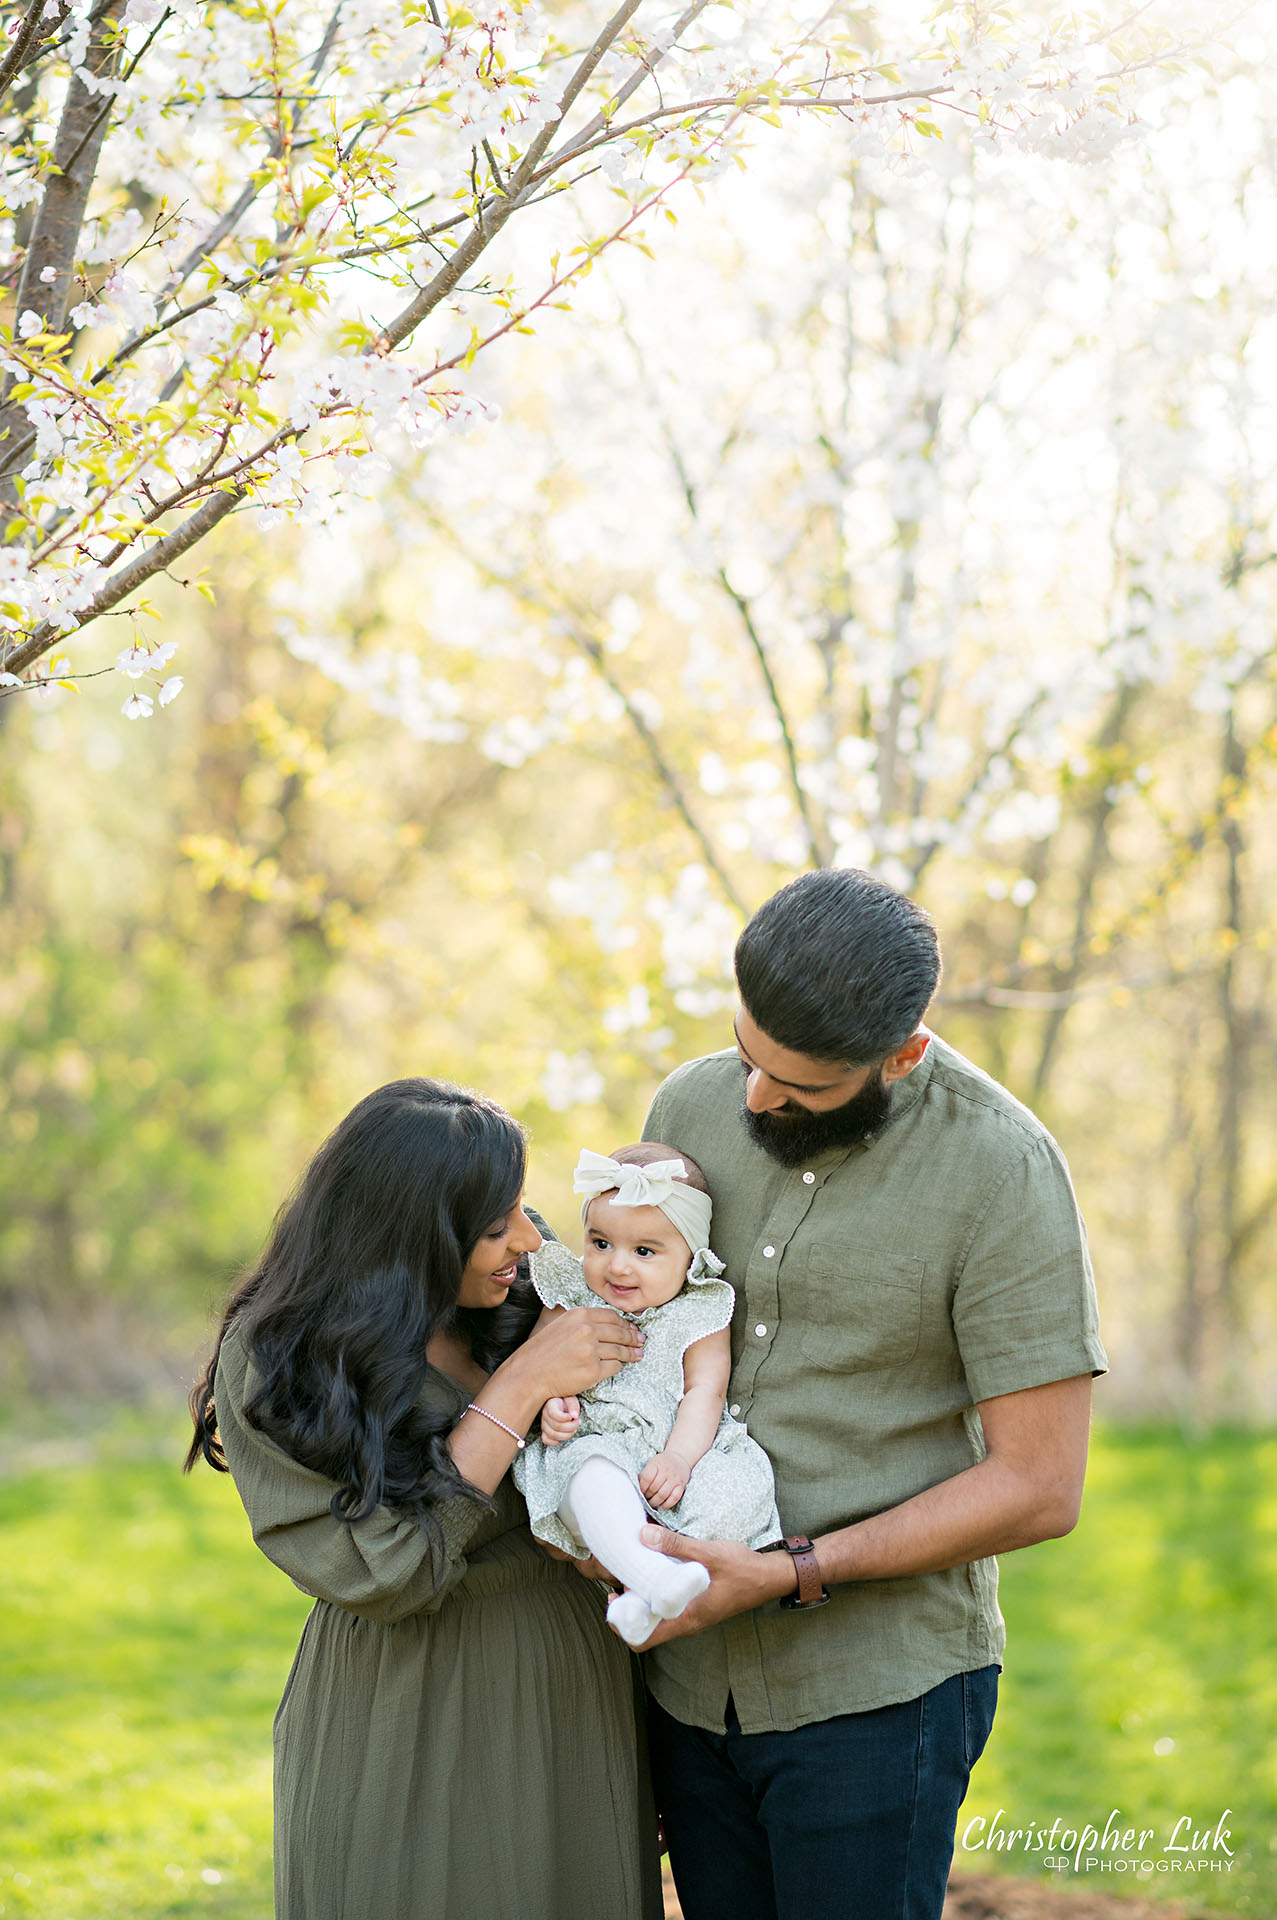 Christopher Luk Toronto Family Photographer Cherry Blossoms Mom Mommy Dad Daddy Motherhood Fatherhood Baby Portrait Candid Natural Photojournalistic Organic Cute Laugh